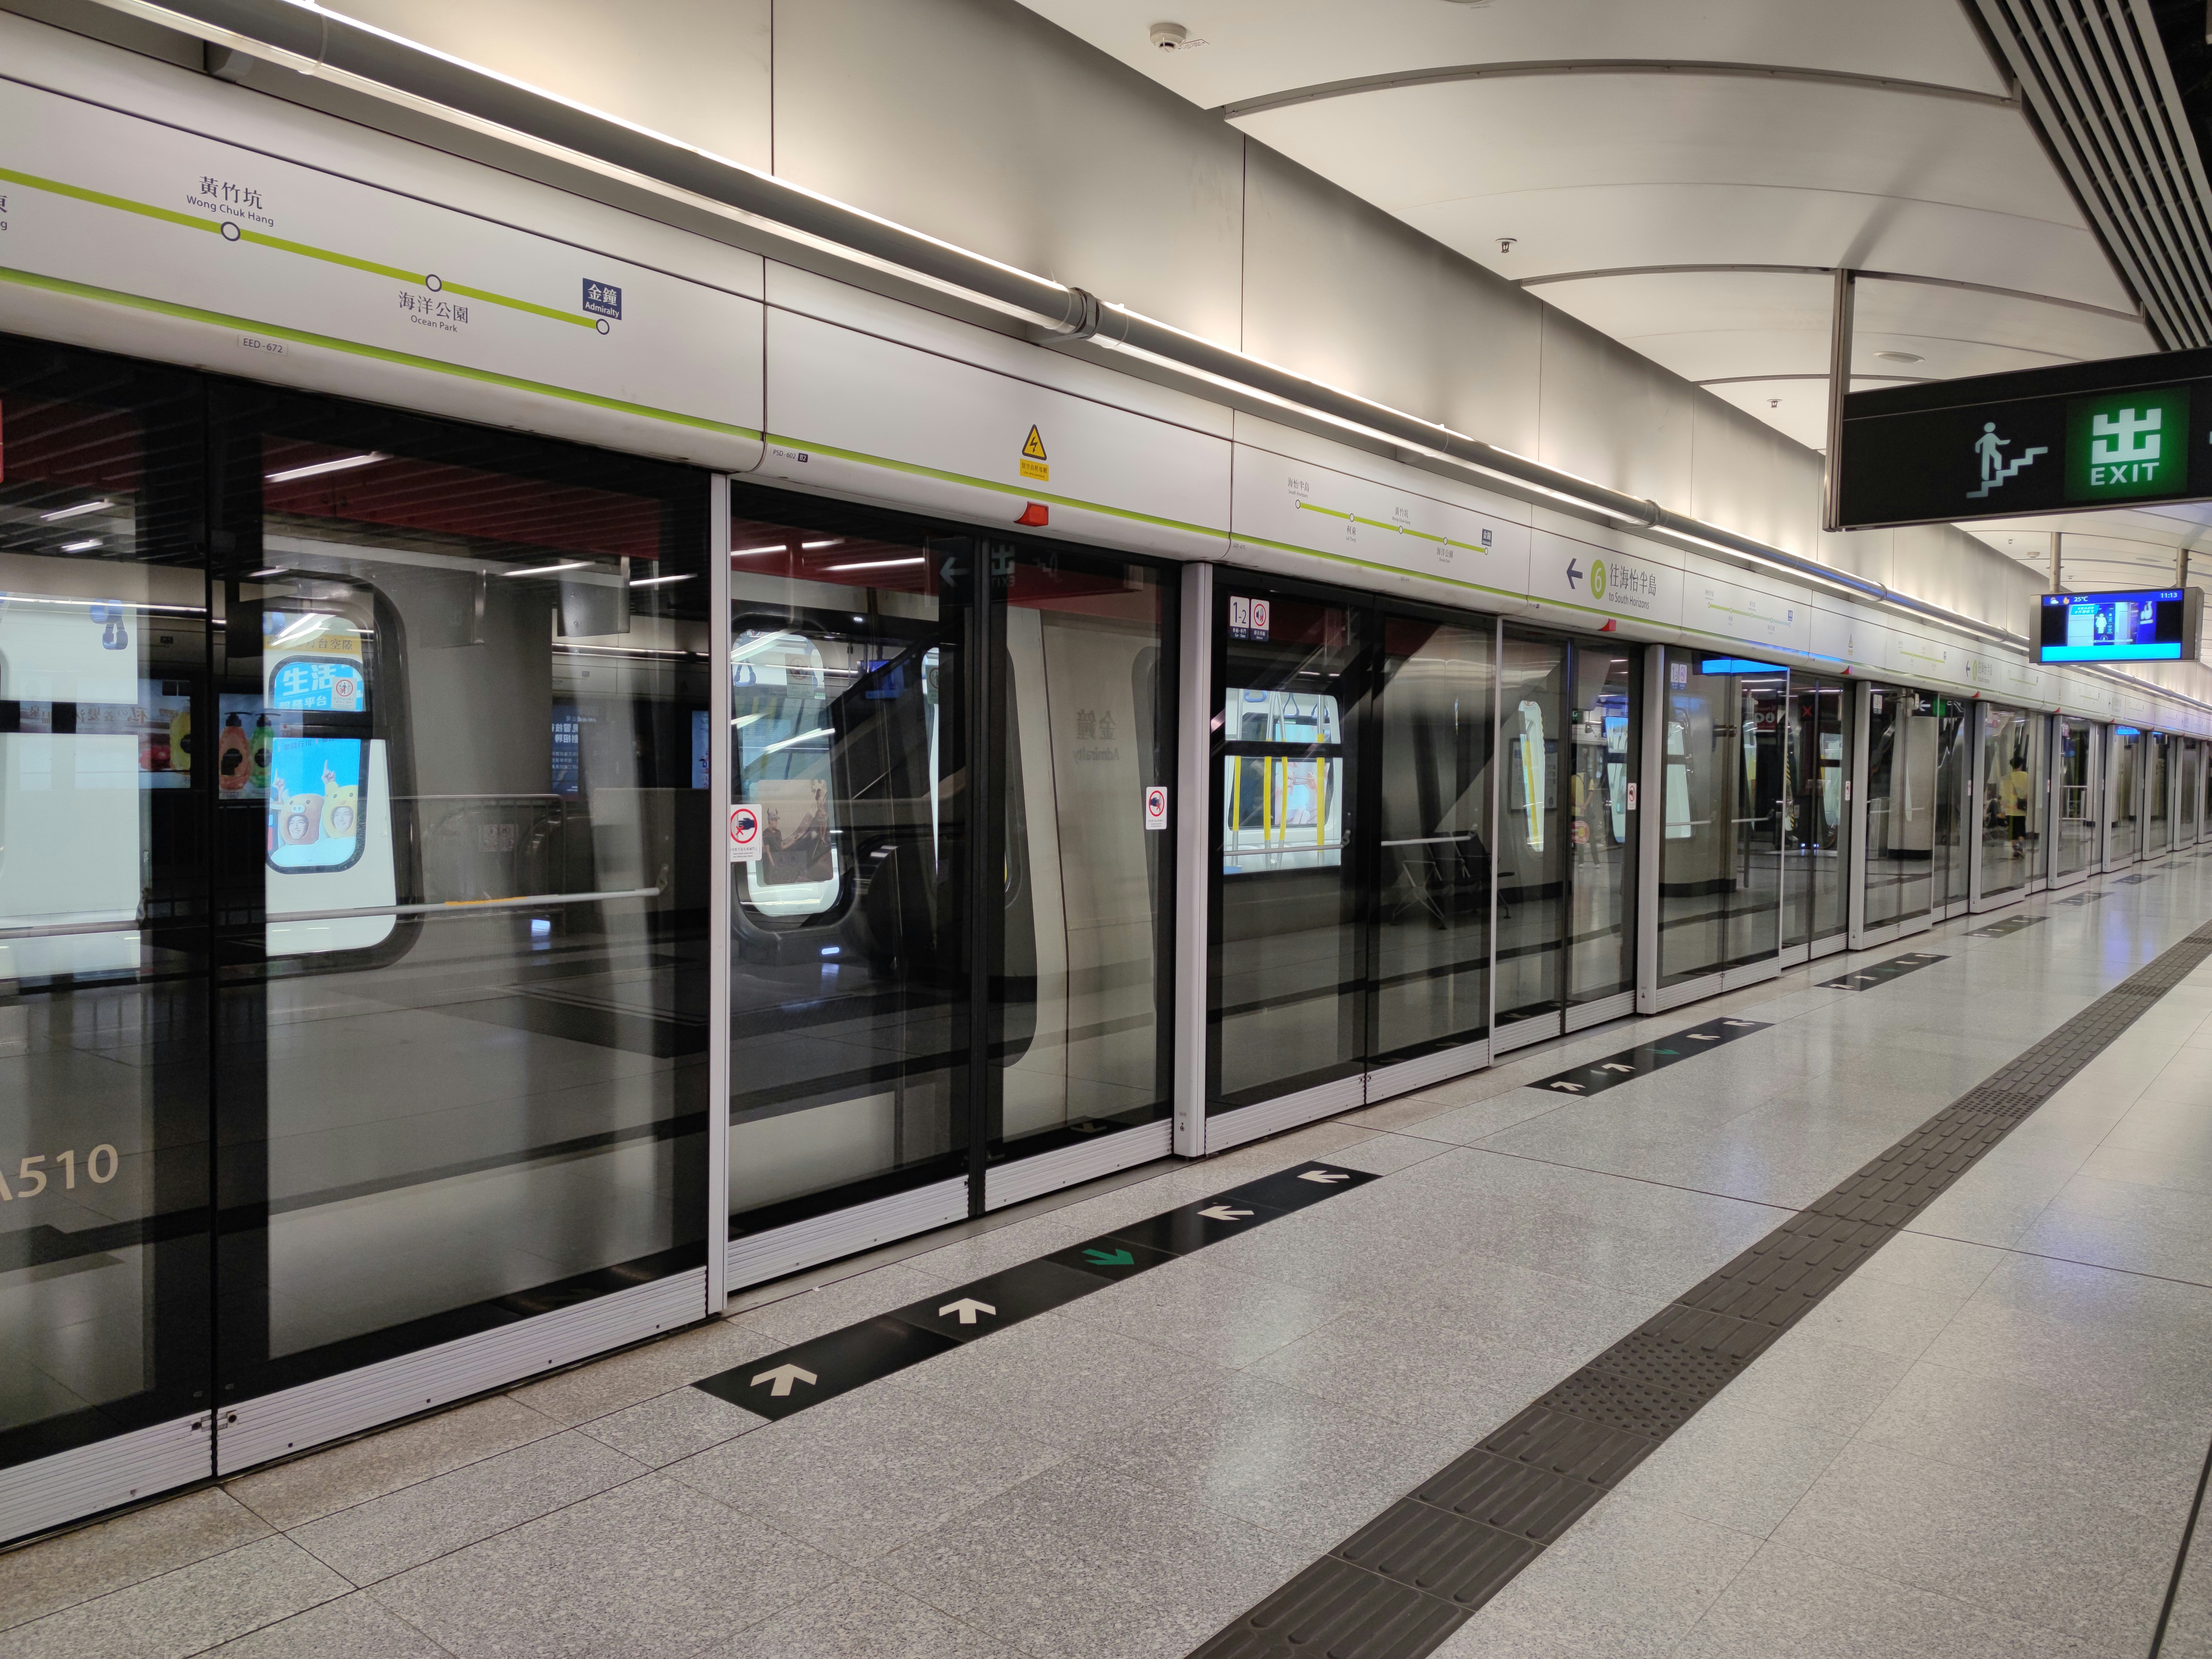 A train stand by at an MTR (underground train) platform. In case a train is contaminated, e.g. by a passenger vomited on the train, this train can be ready in service..